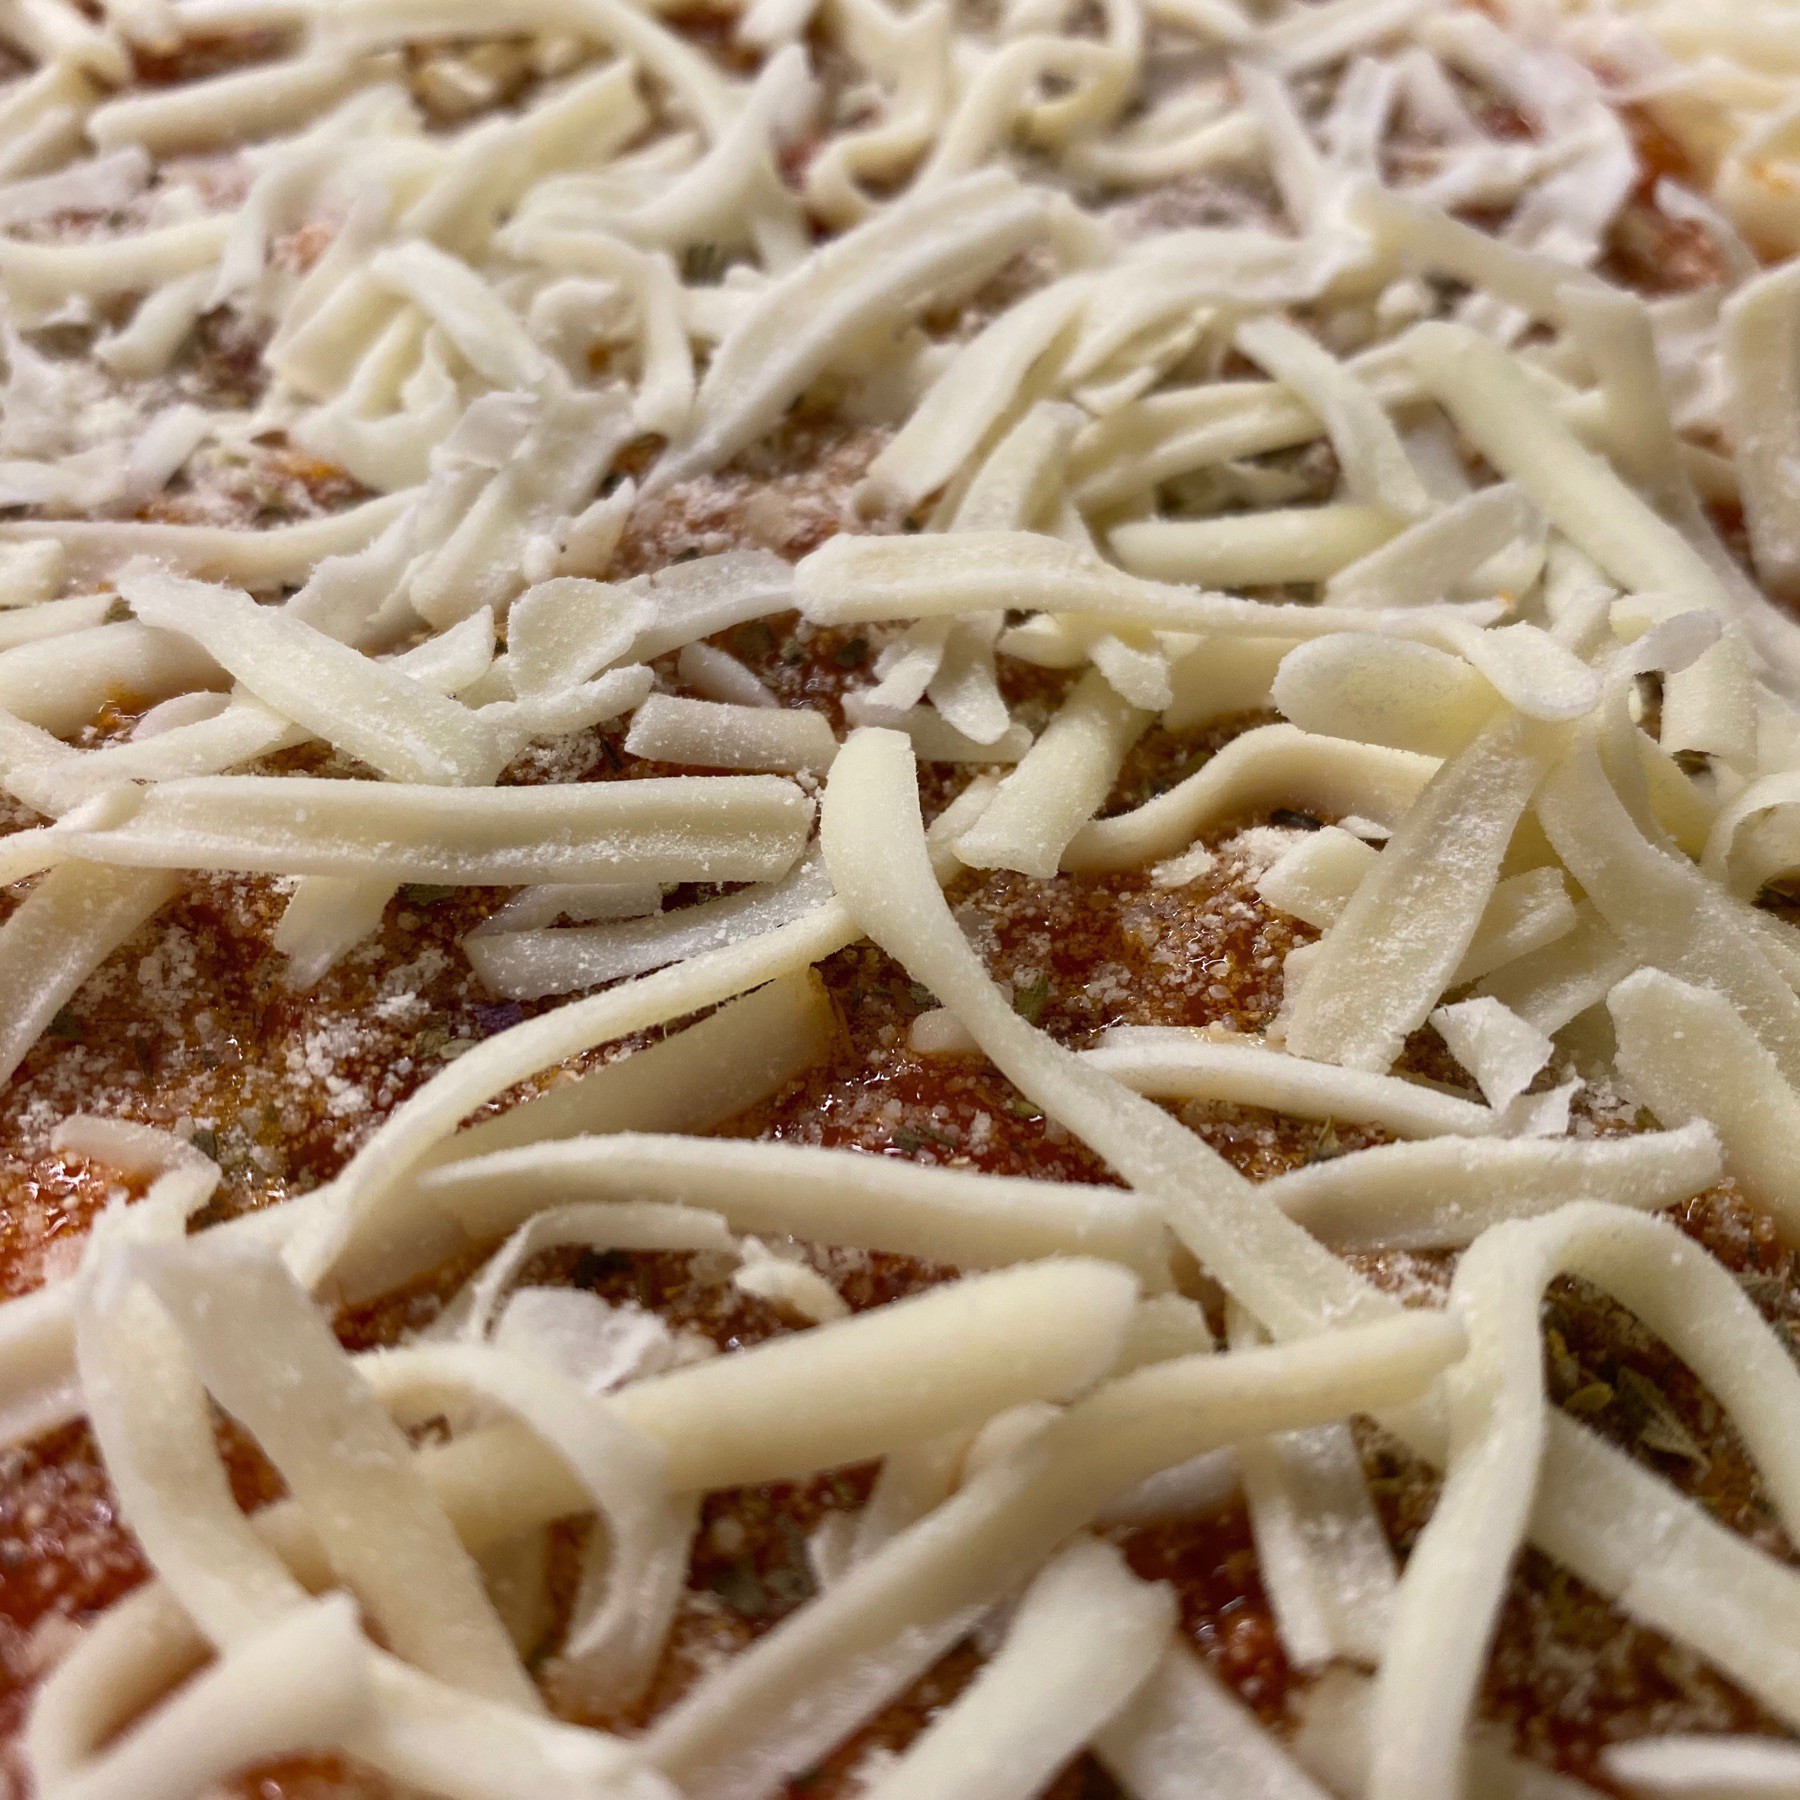 Cheese on pizza before baking.